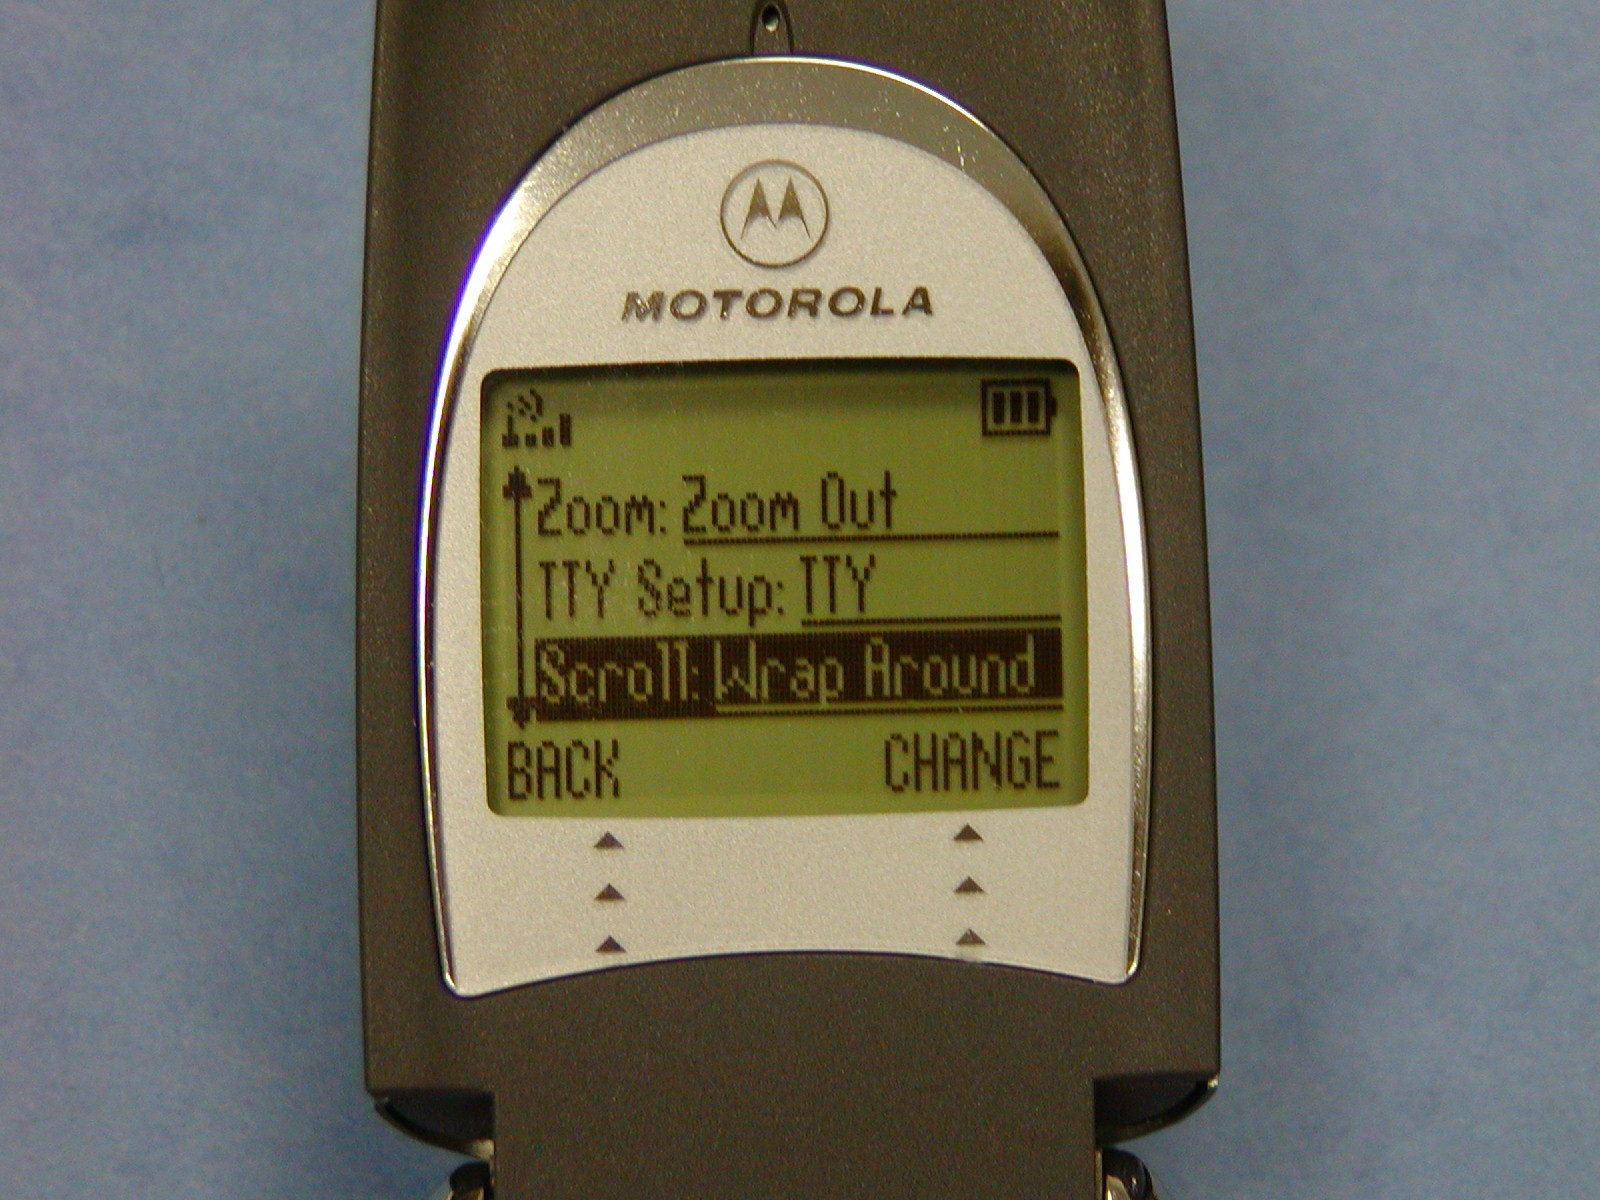 Image of Menu on a Motorola cell pohone showing TTY setup